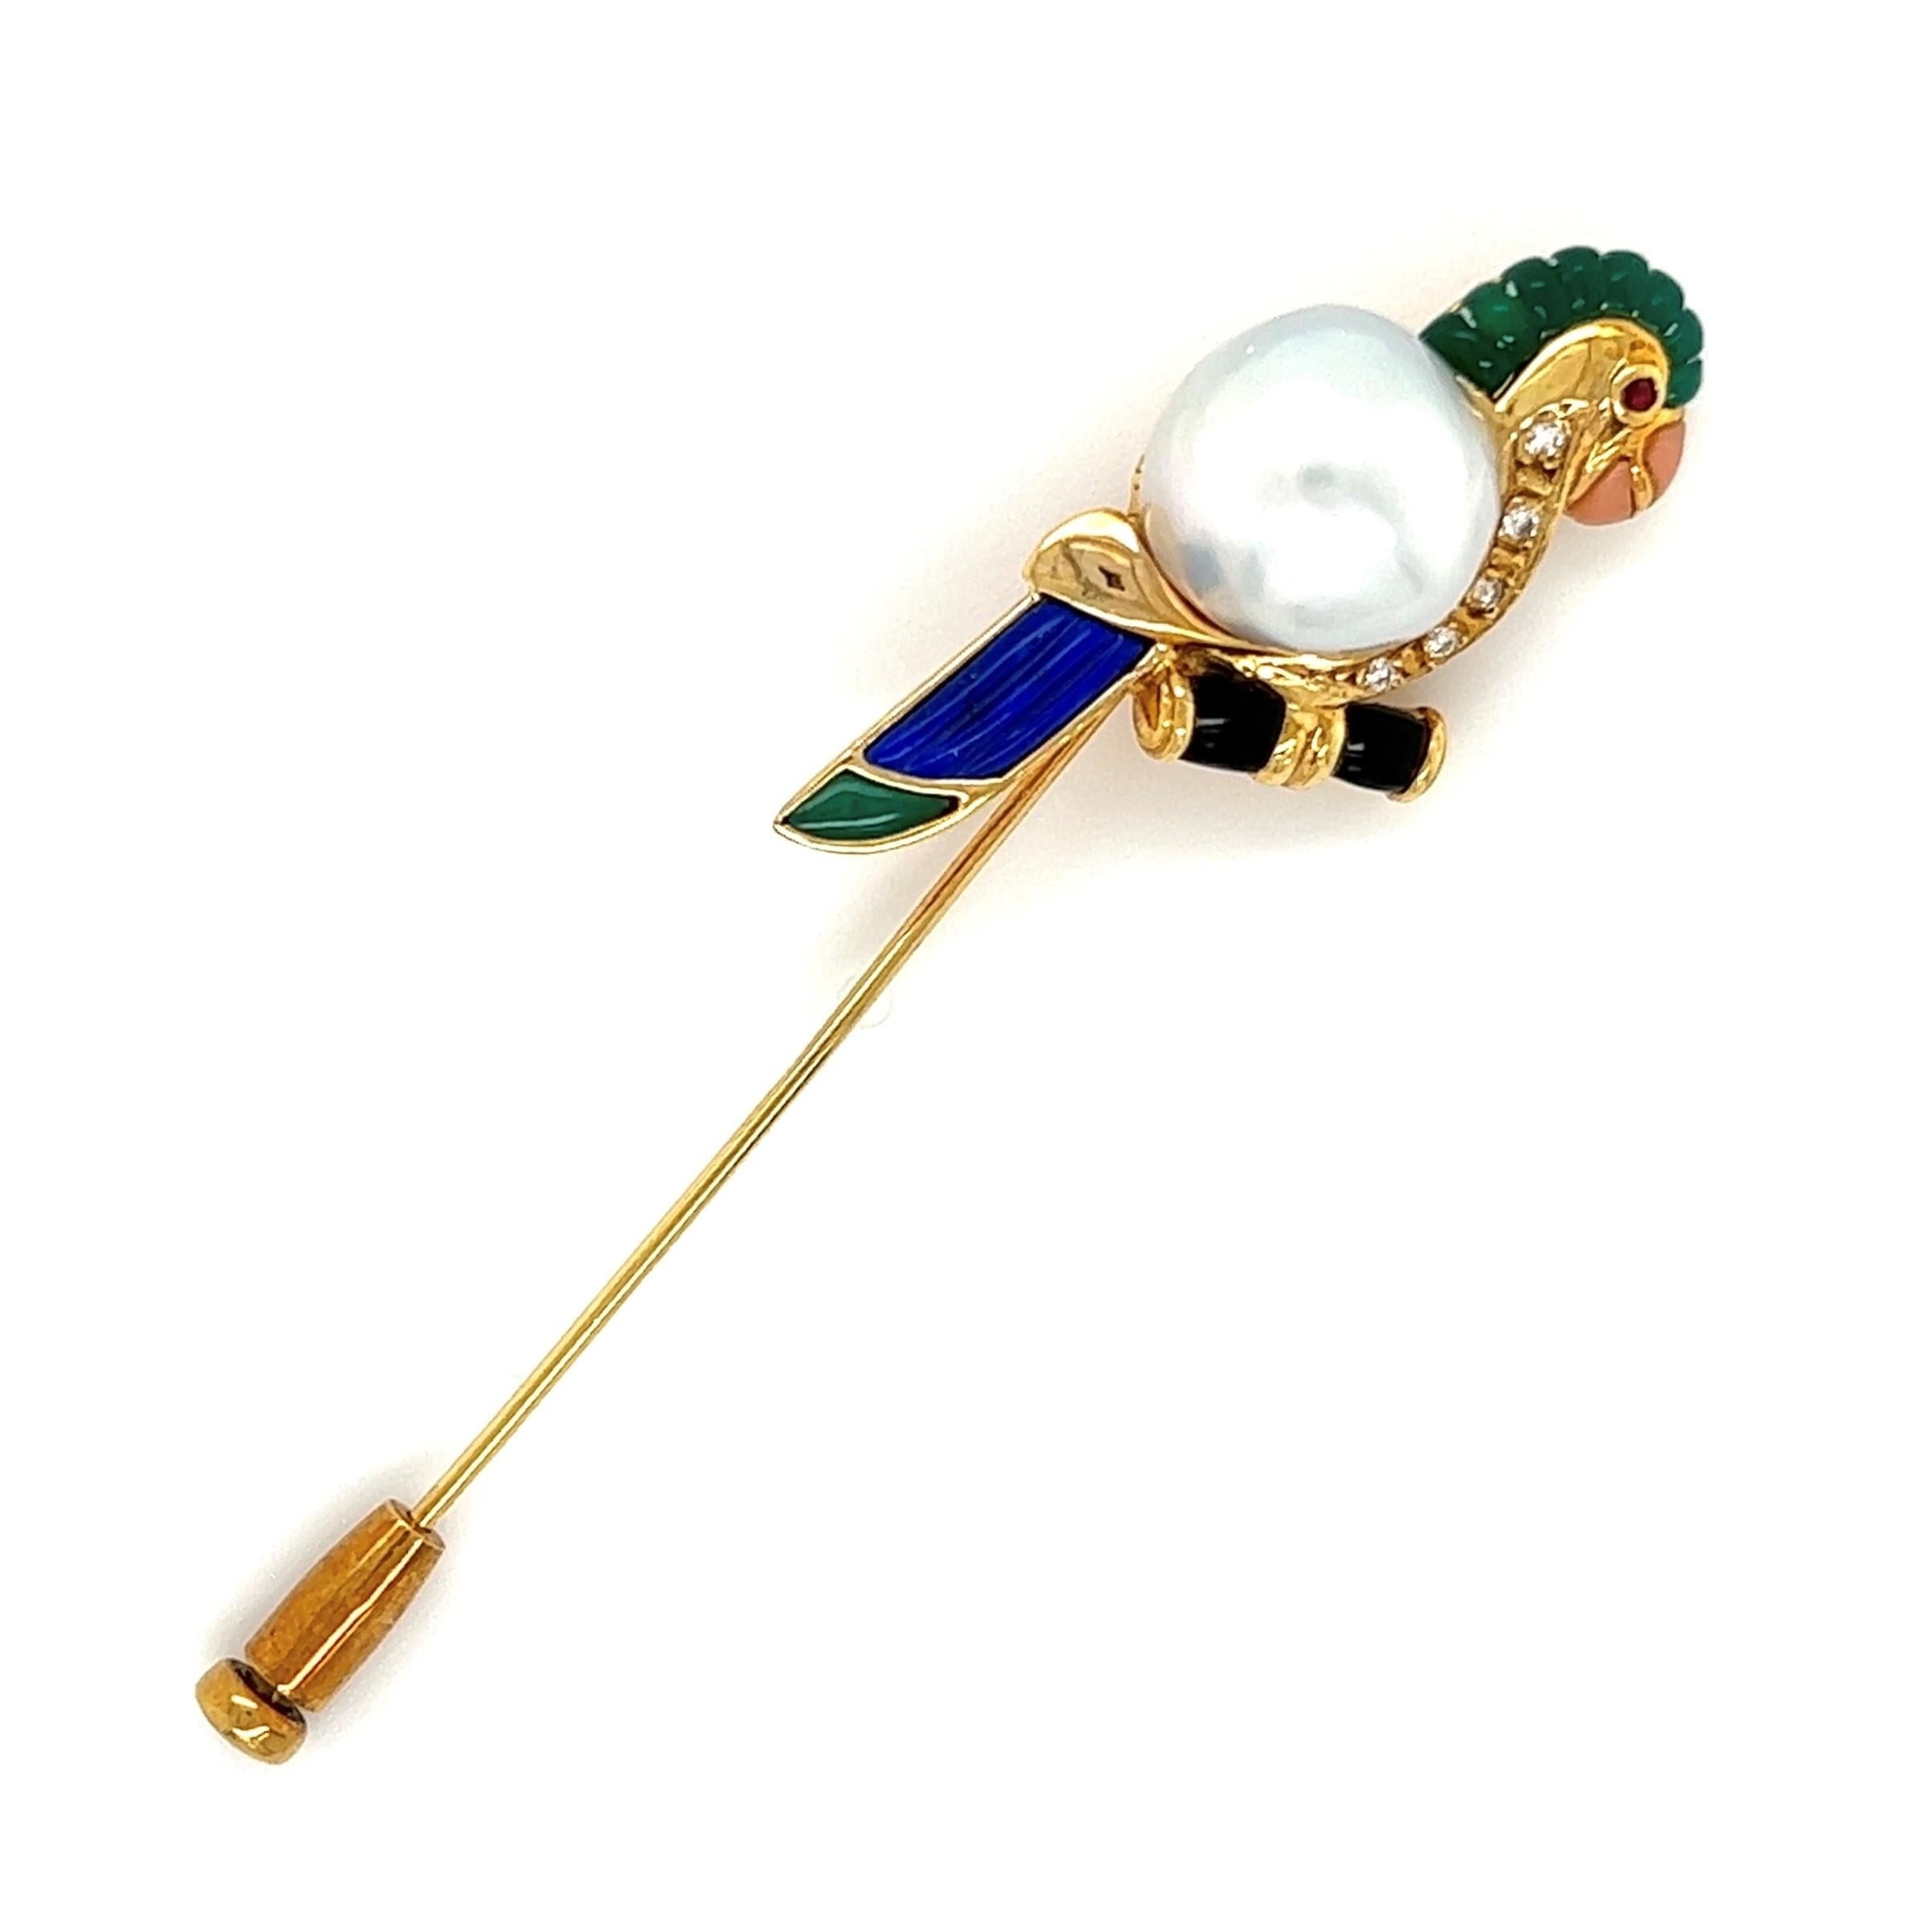 Simply Beautiful! Finely detailed Whimsical Vintage Multi-Gem Parrot Stick Pin. Securely Hand set with Chrysoprase, Coral, Ruby, Diamond, Pearl, Onyx and Malachite. Artistically Hand crafted in 18K Yellow Gold. Dimensions: 2.66” l x 0.66” w x 0.53”